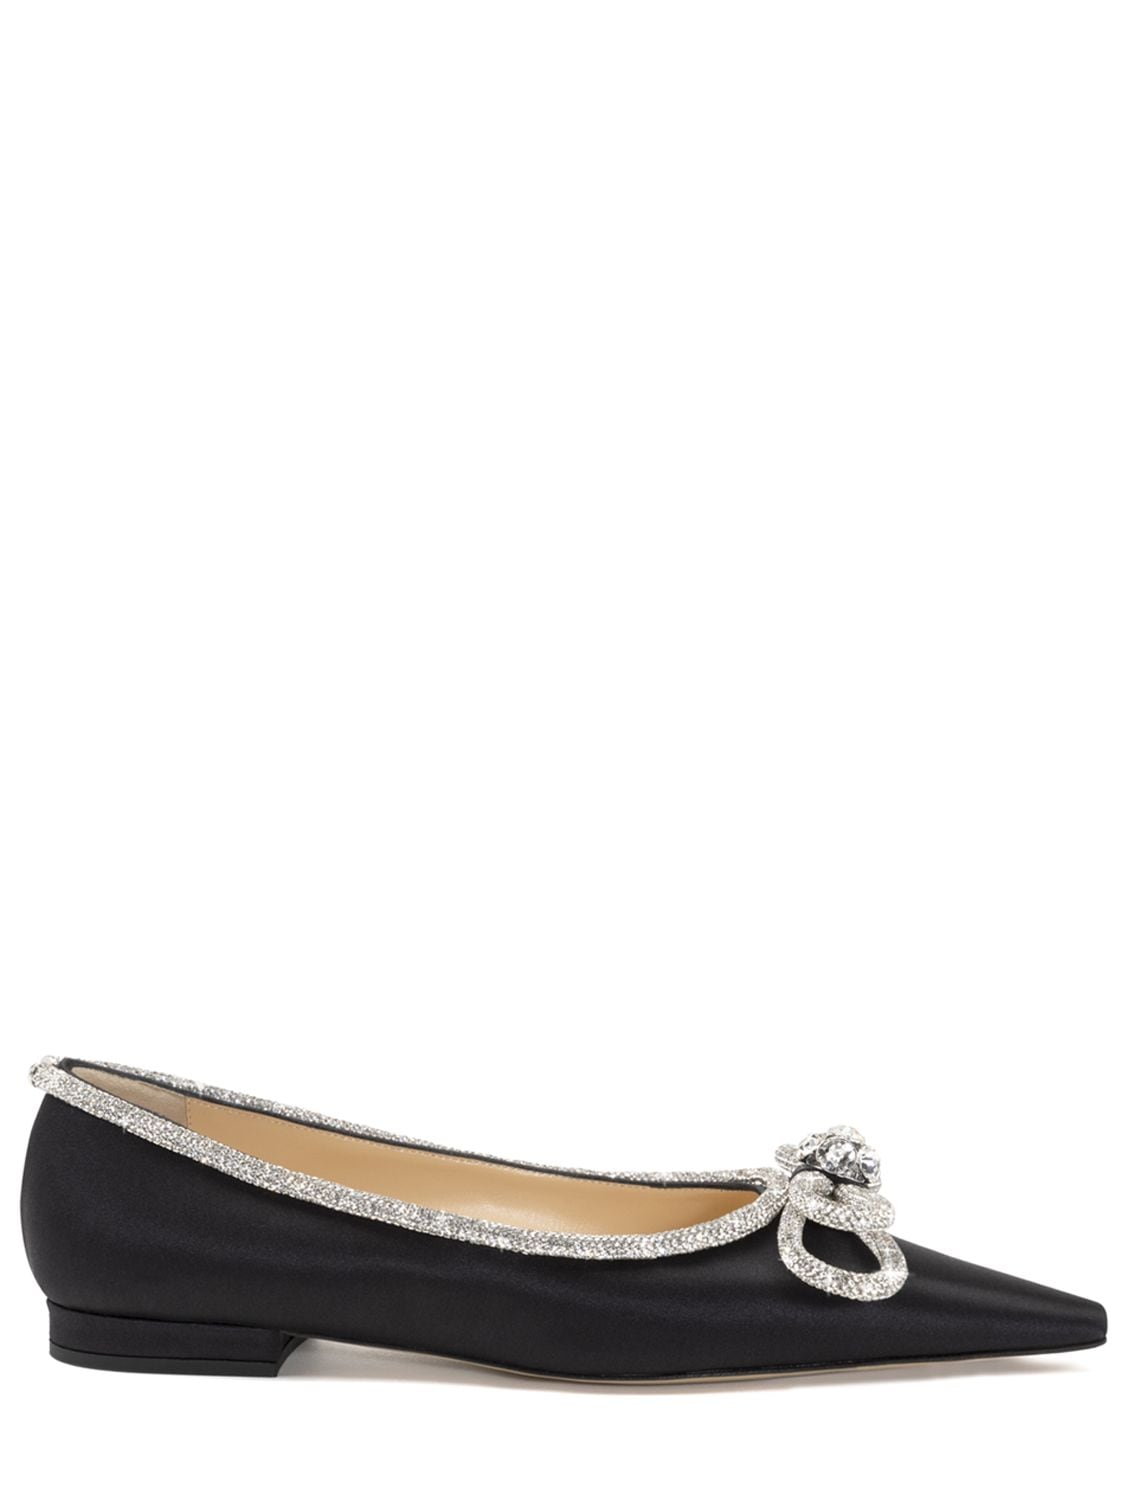 Mach & Mach 10mm Double Bow Satin Flats In Black